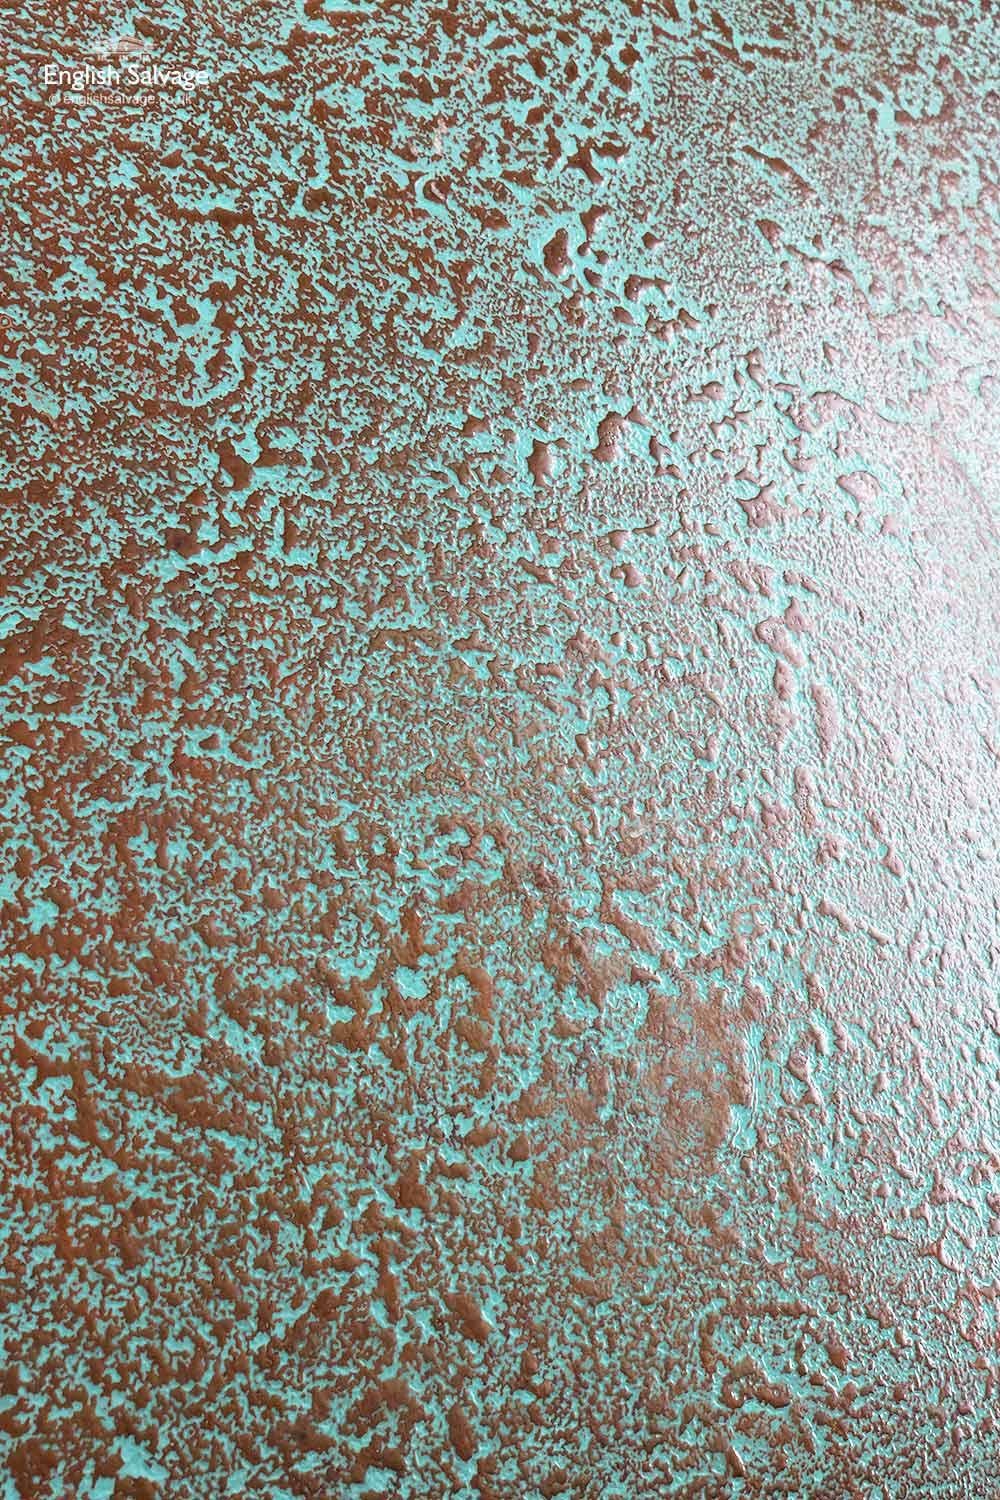 Reclaimed composite wood panels with a patinated copper finish and metal banding to edges. The panels are made from a composite wood and then have a sheet of patinated copper bonded to the front. These would make unique wall panelling. We have 9